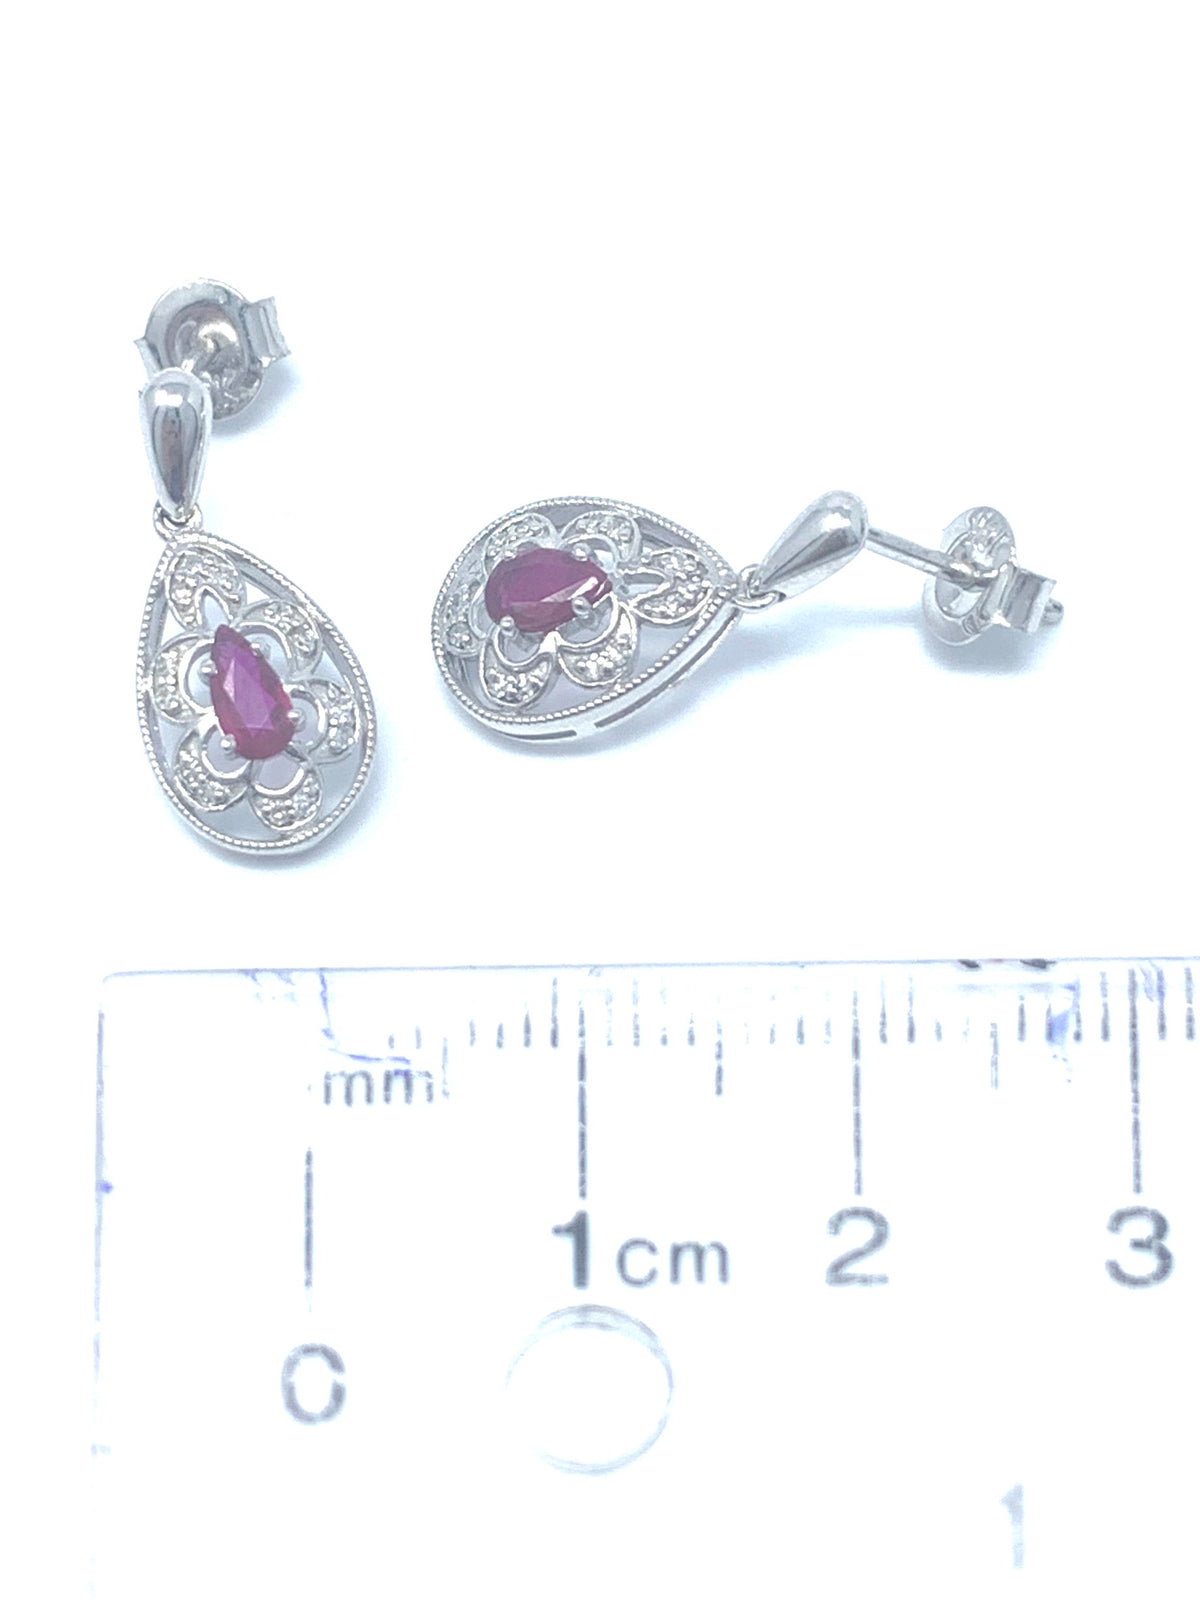 10K White Gold 0.55cttw Genuine Ruby and 0.11cttw Diamond Earrings